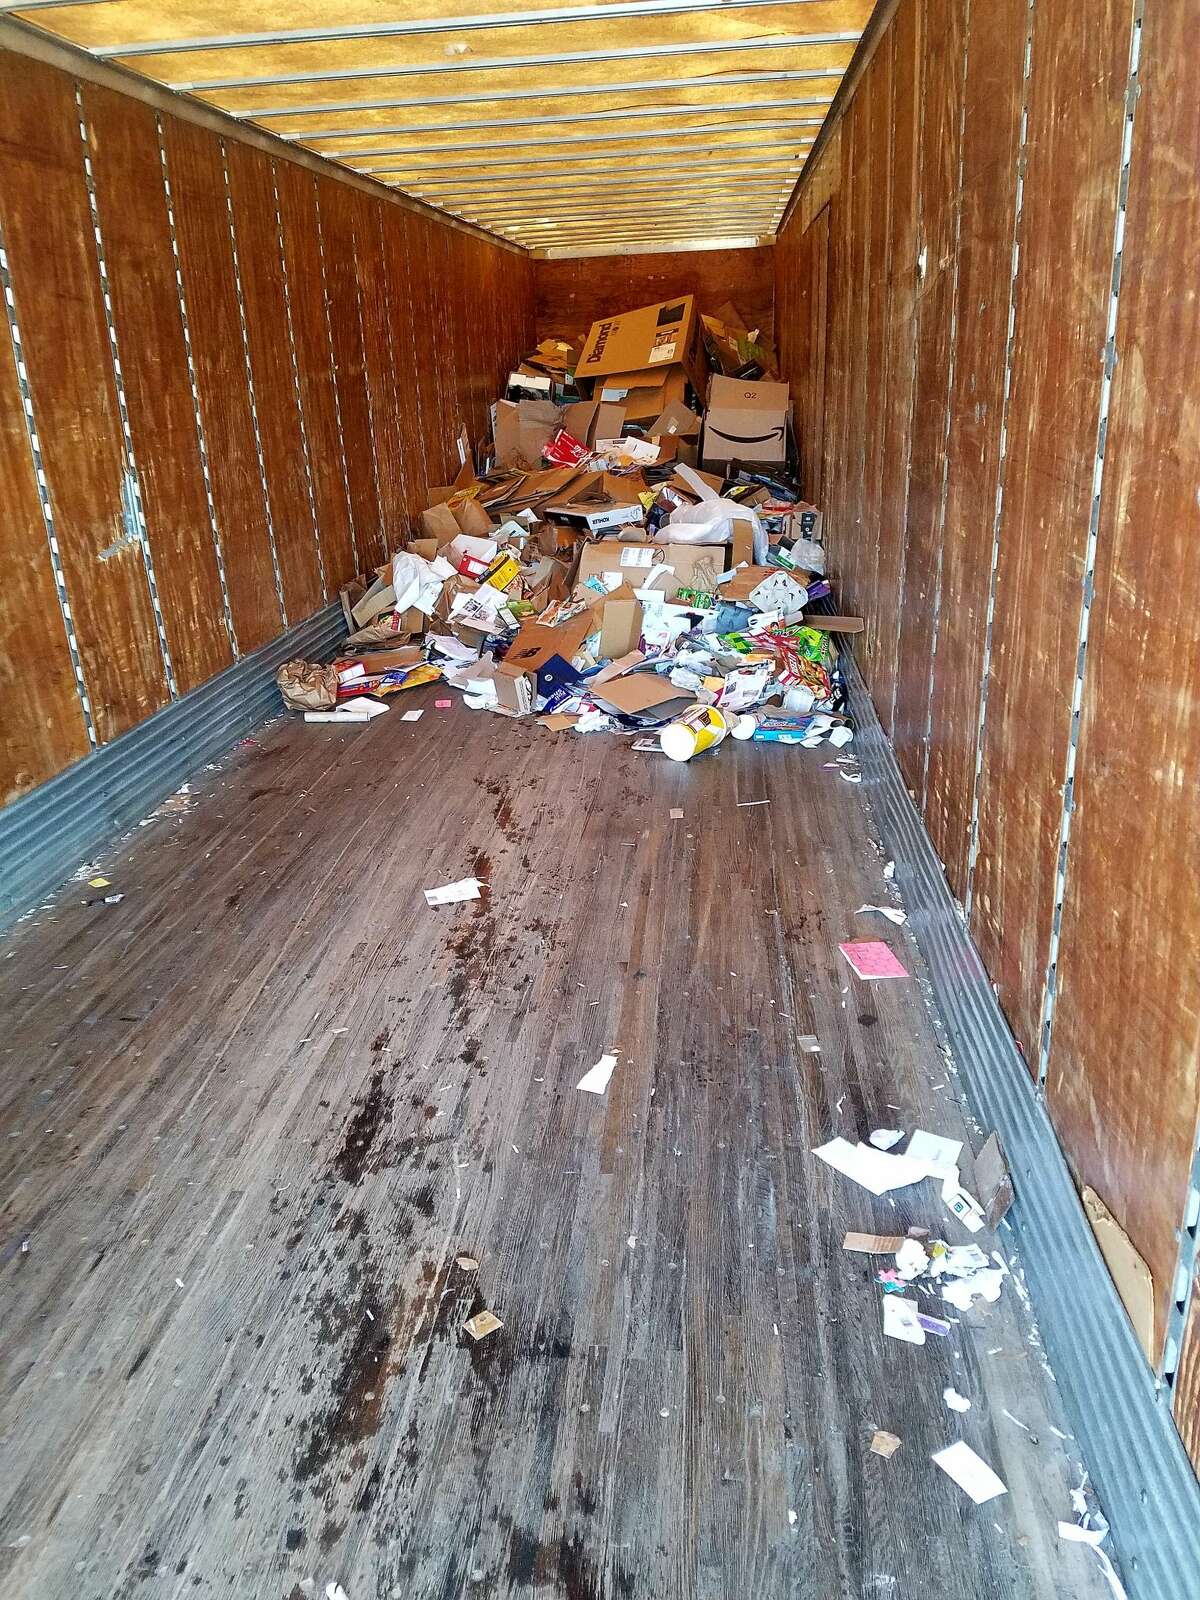 Despite space in the Manistee Central Catholic cardboard recycling trailer, resident Breanna Knudsen found piles of cardboard outside on Jan. 25.